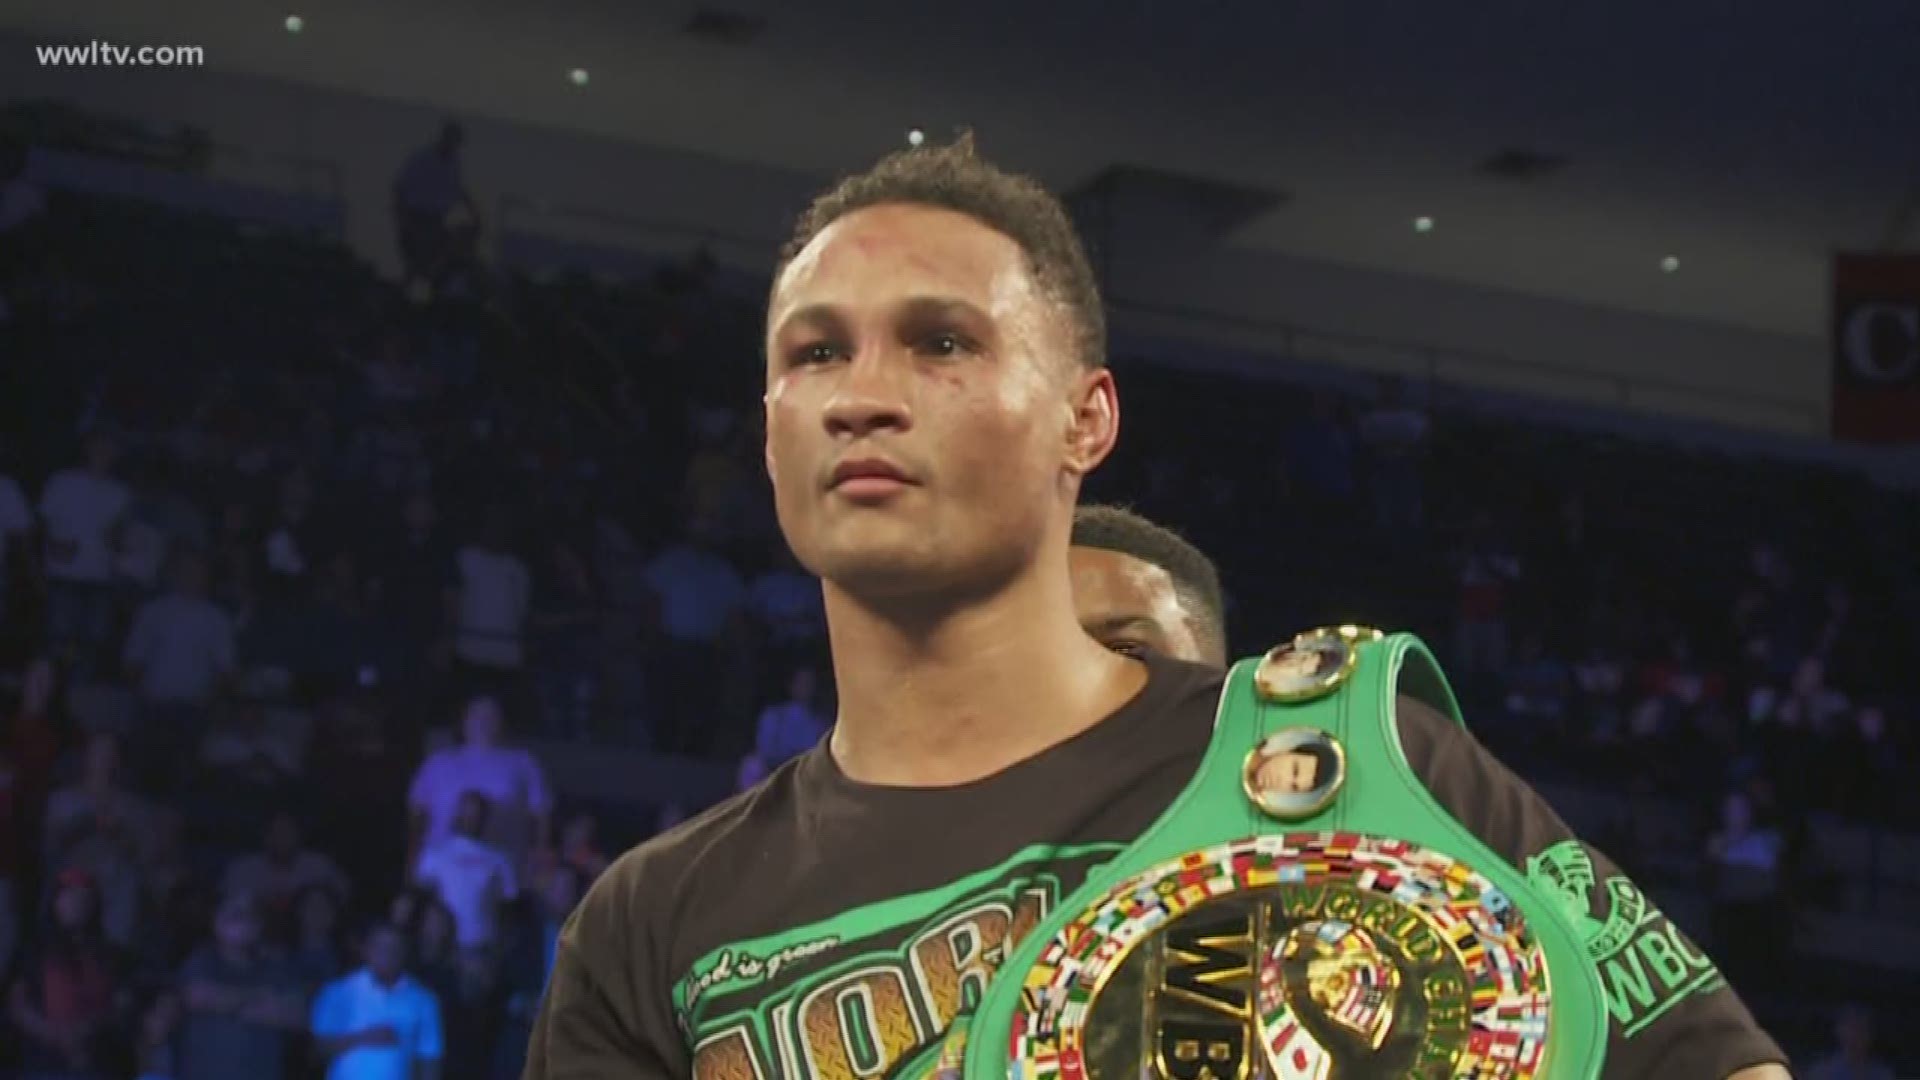 Prograis landed 43 percent of his power punches to score his 19th knockout as a pro to retain the title. 